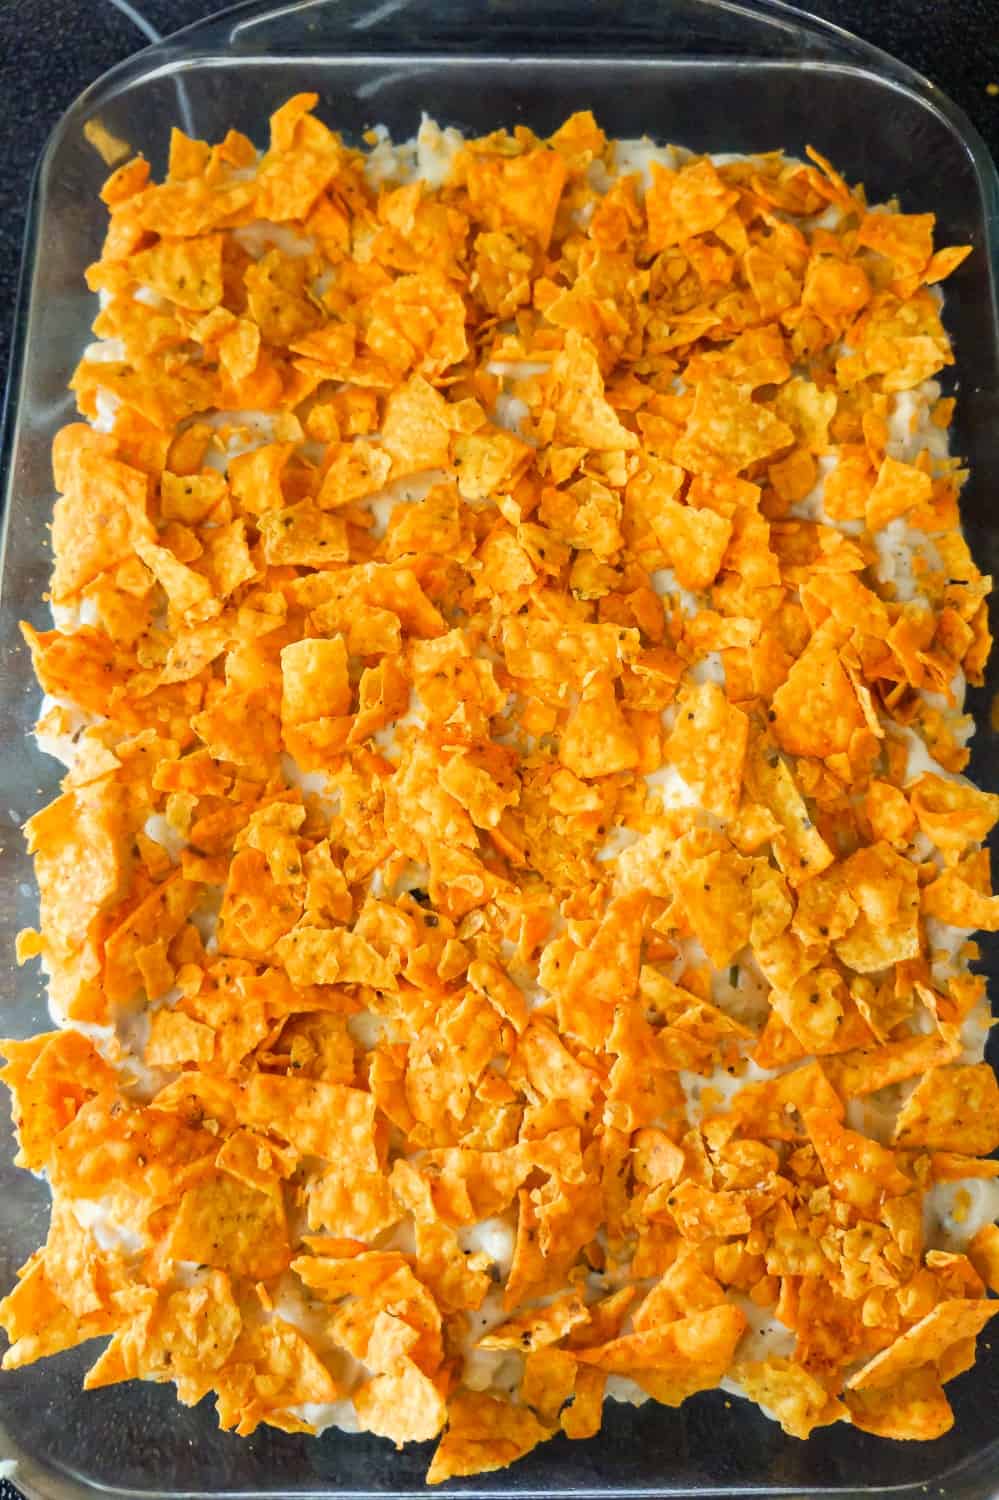 crumbled Doritos on top of mac and cheese in a baking dish